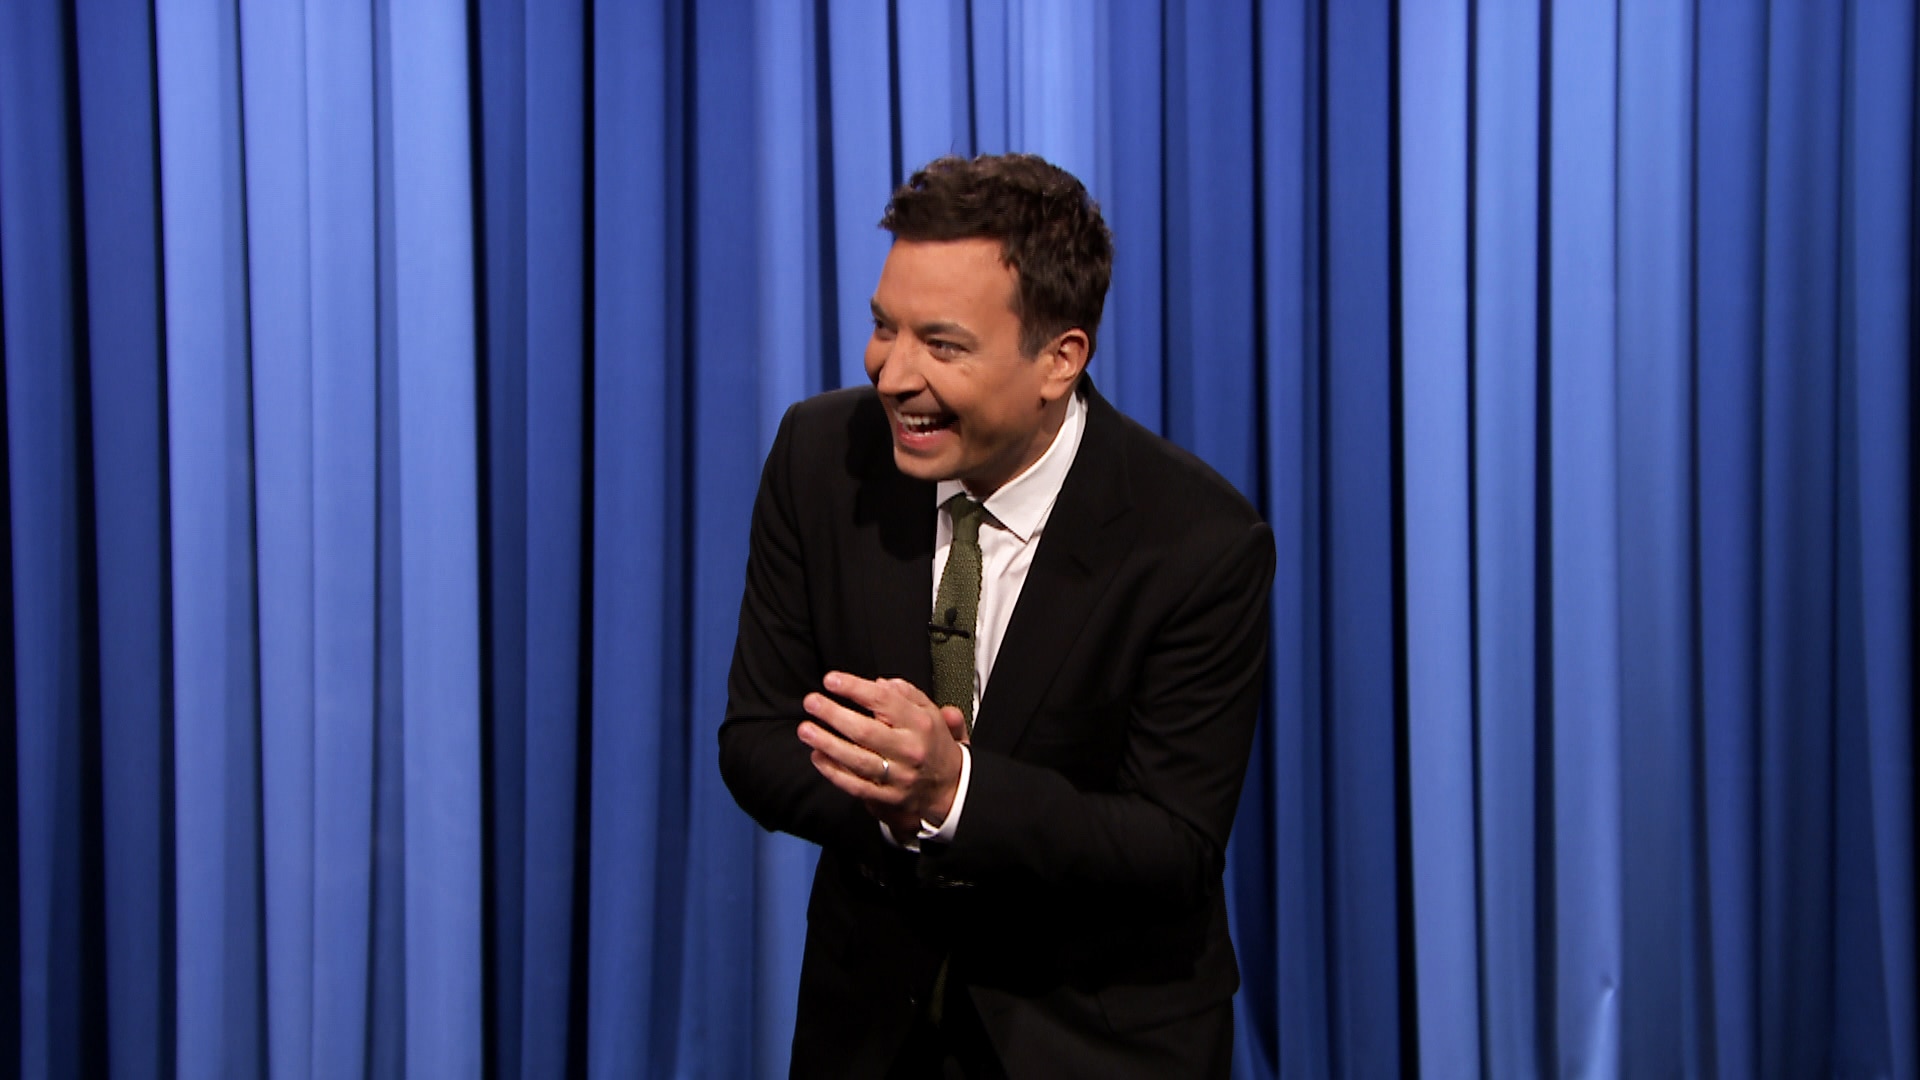 Watch The Tonight Show Starring Jimmy Fallon Highlight Alcohol Nutrition Facts Monologue 0592